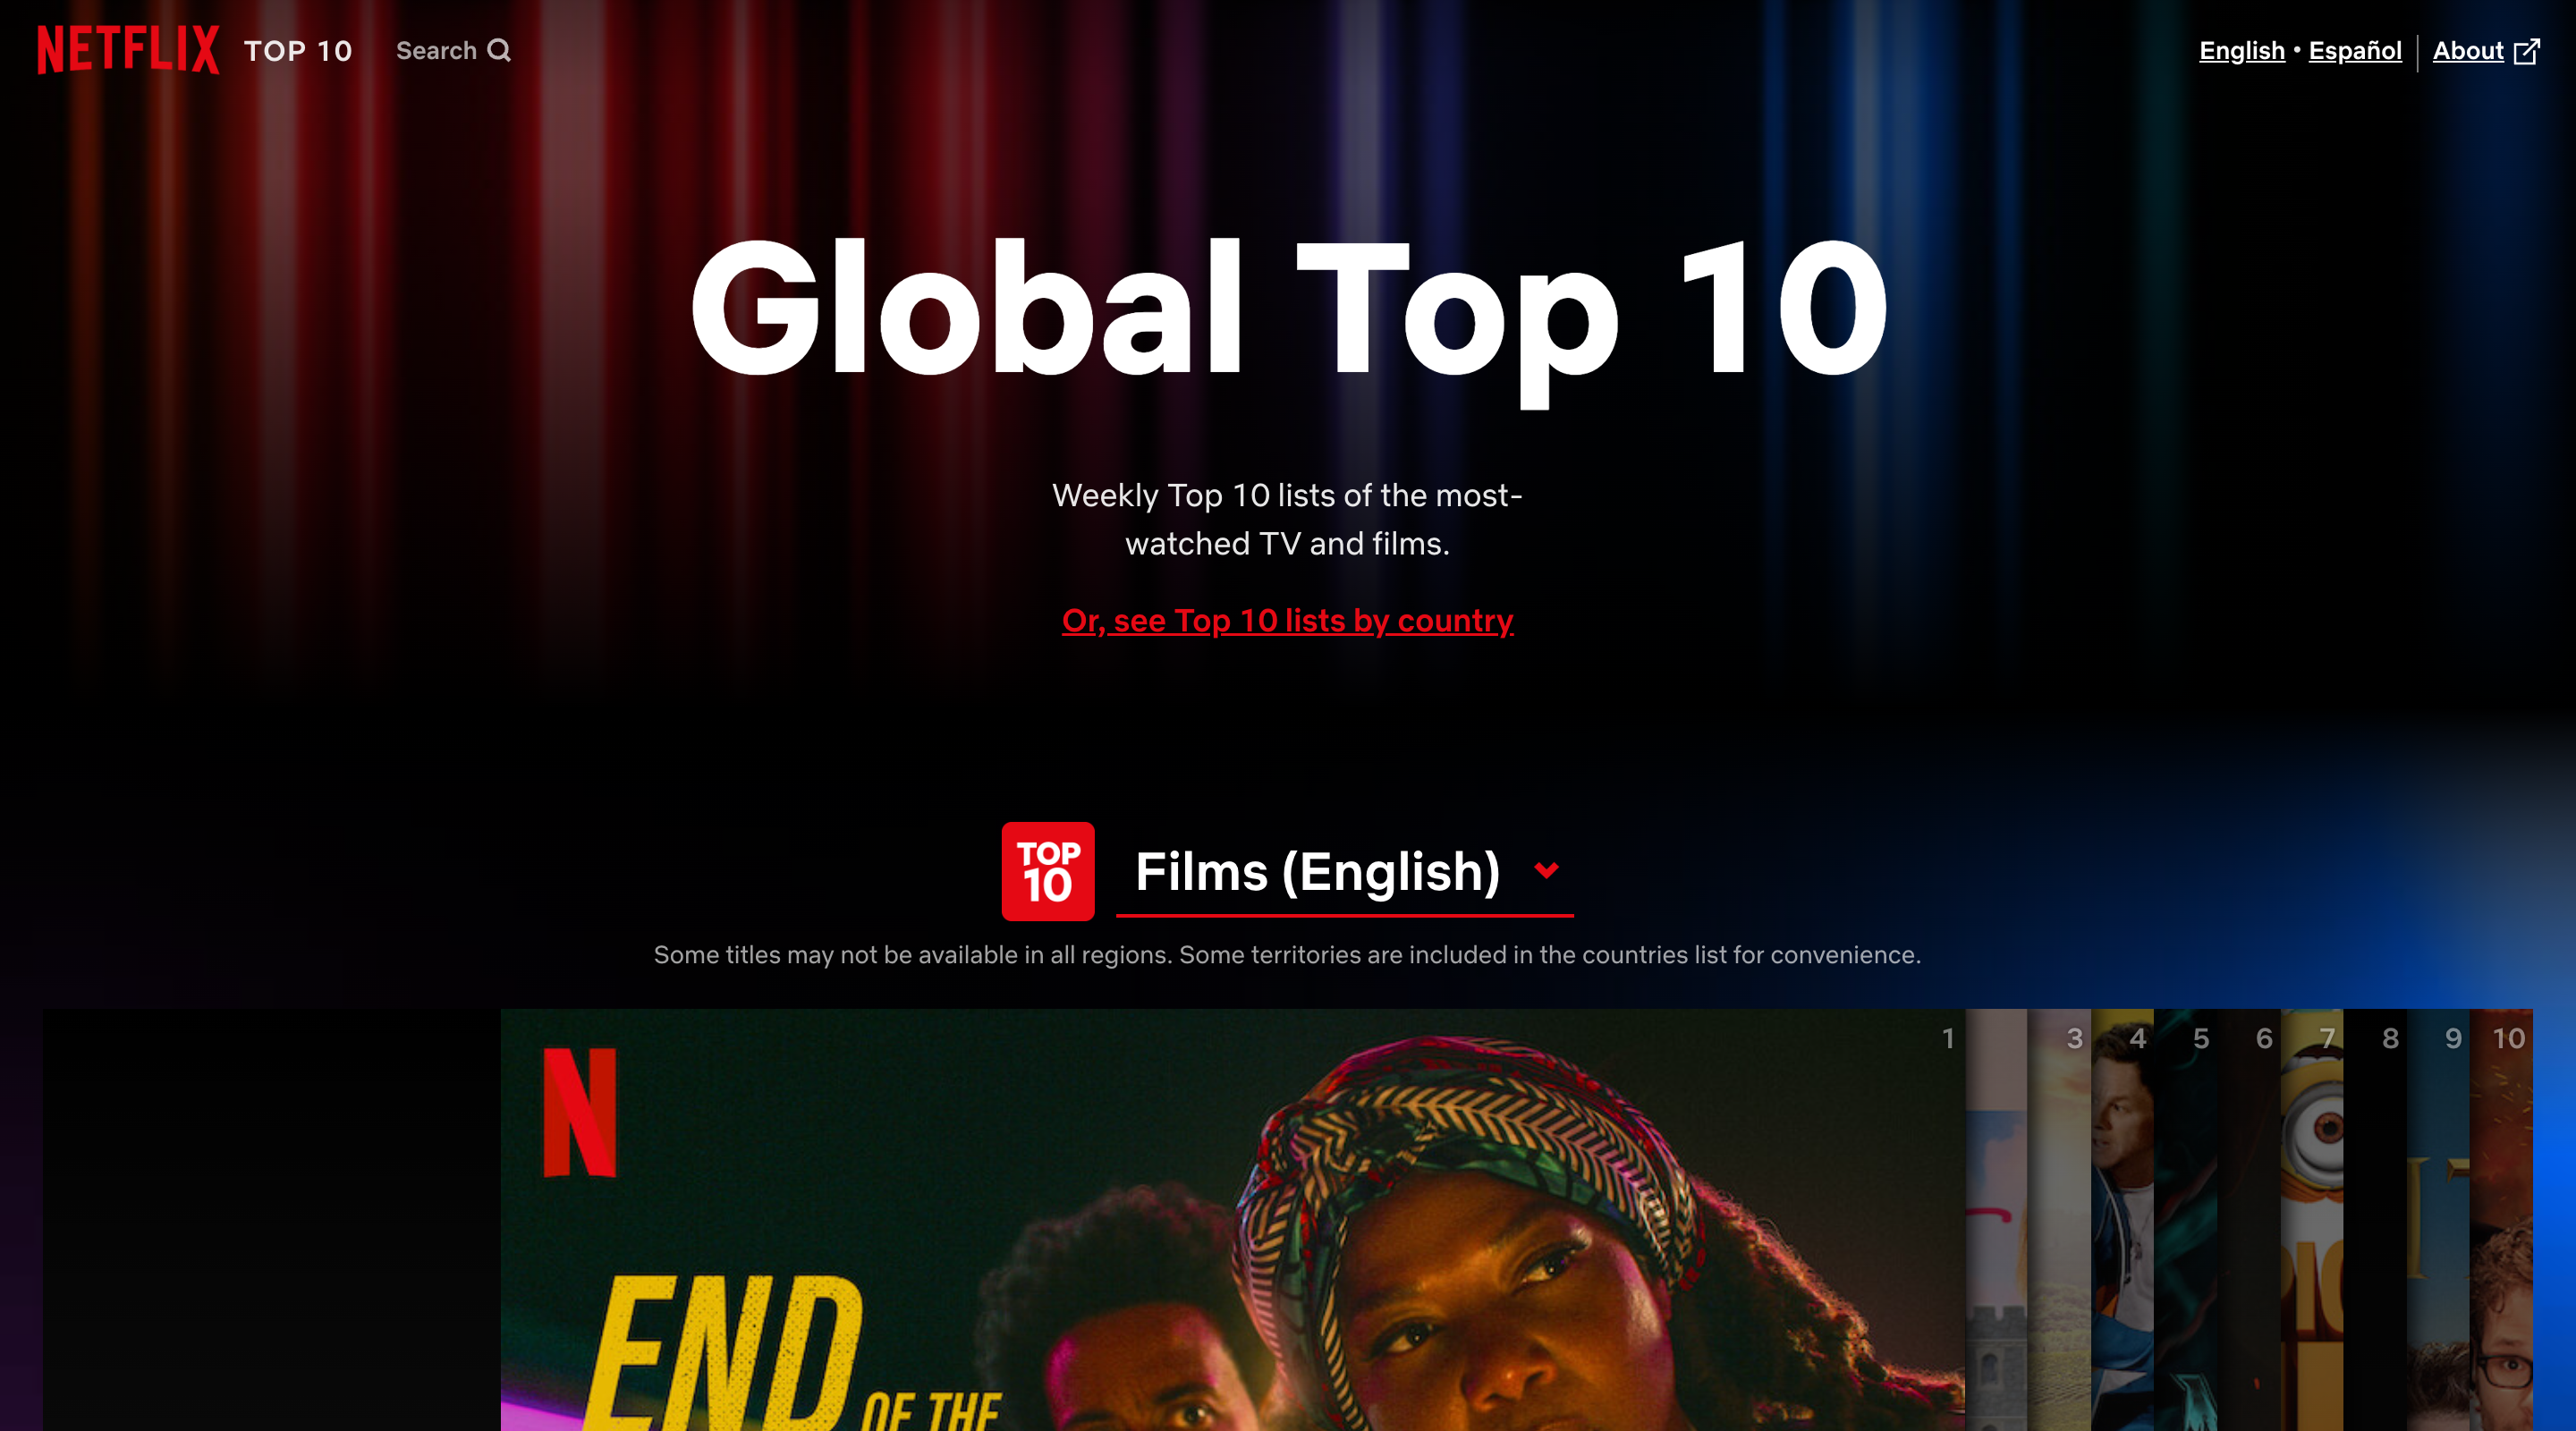 Screenshot of the Netflix Top 10 website. The header contains the Netflix logo and a search bar. The page title is displayed in large lettering and at the bottom of the screen there is a carousel of images showing the top 10 English films.